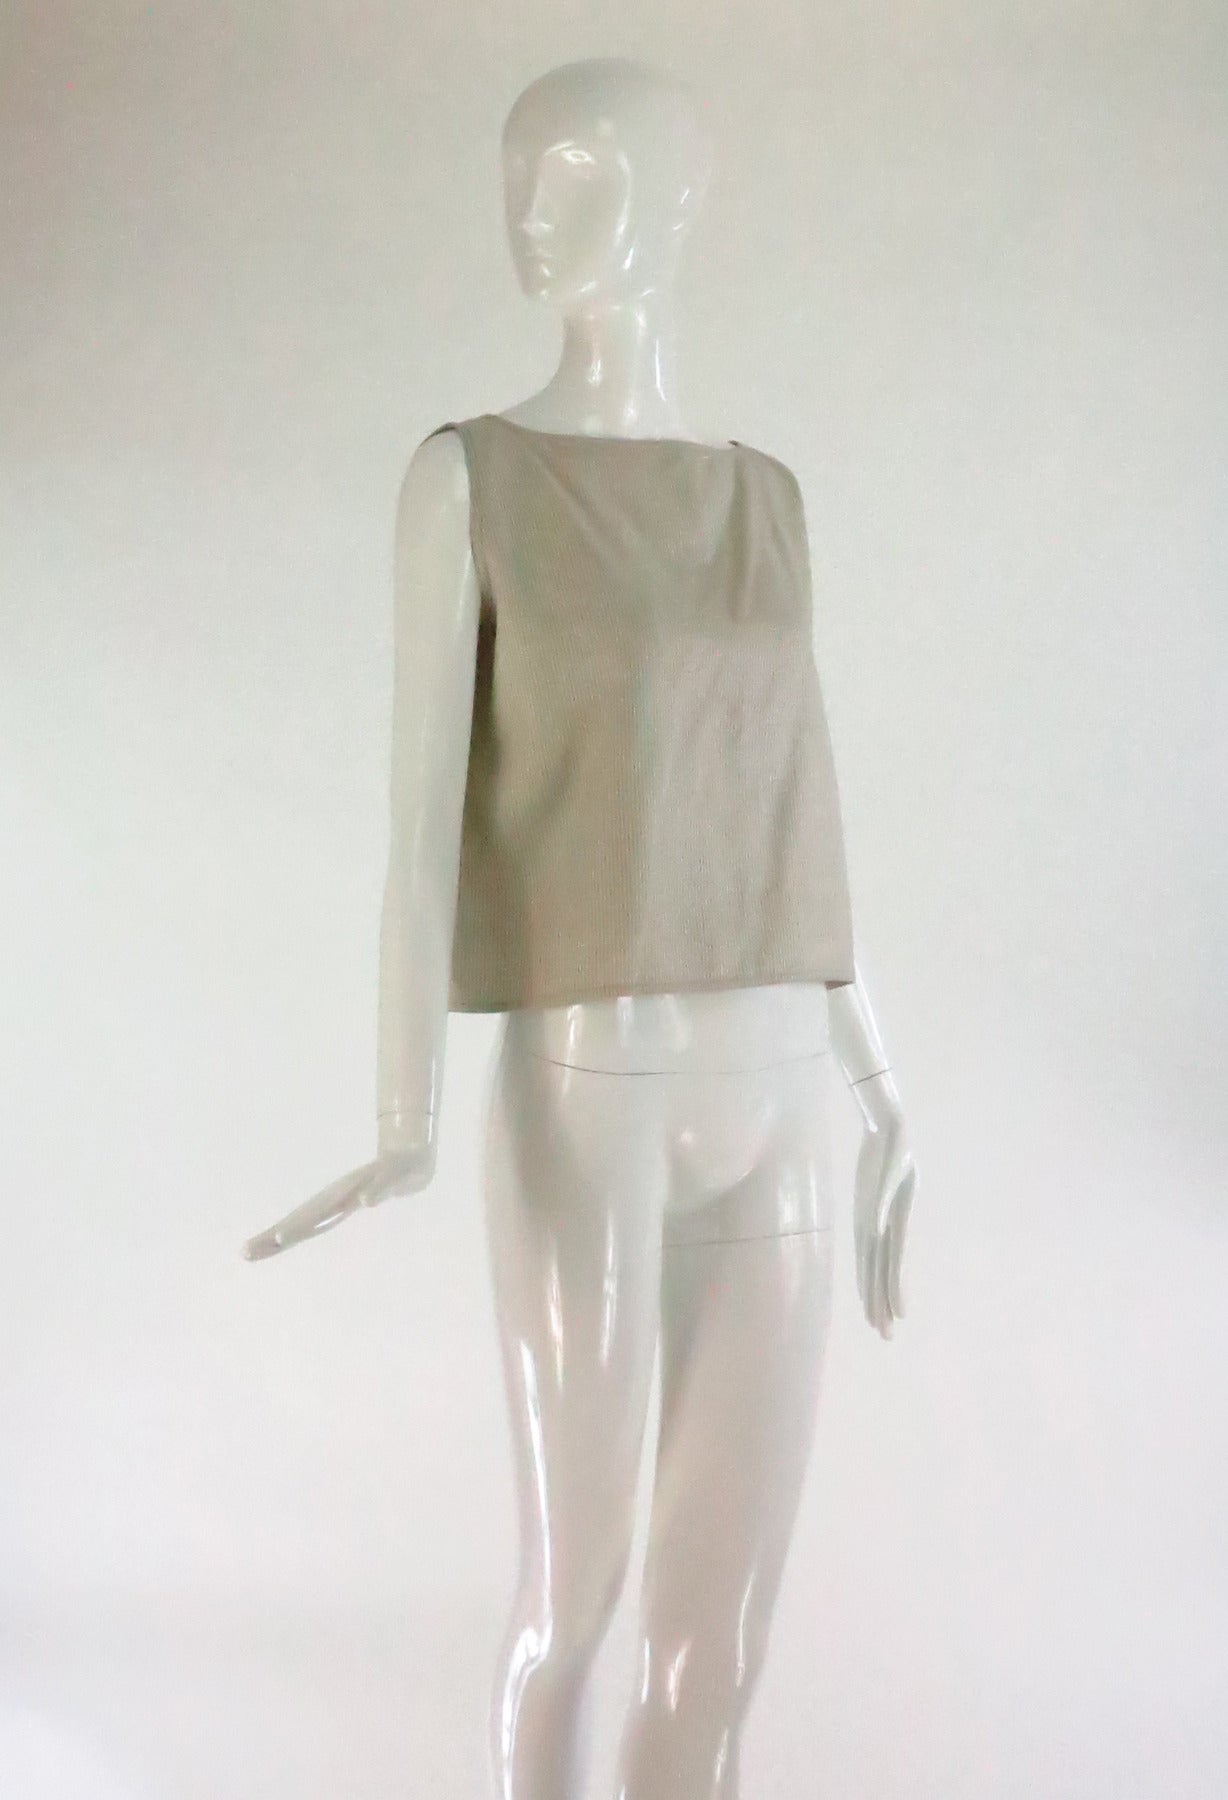 Zoran pinstripe tank top in cashmere and silk...Cream with a pale gray/blue stripe...Cropped, sleeveless top...Never worn...Original price $450...OS

Please check the measurements provided below and compare with your own measurements for the best